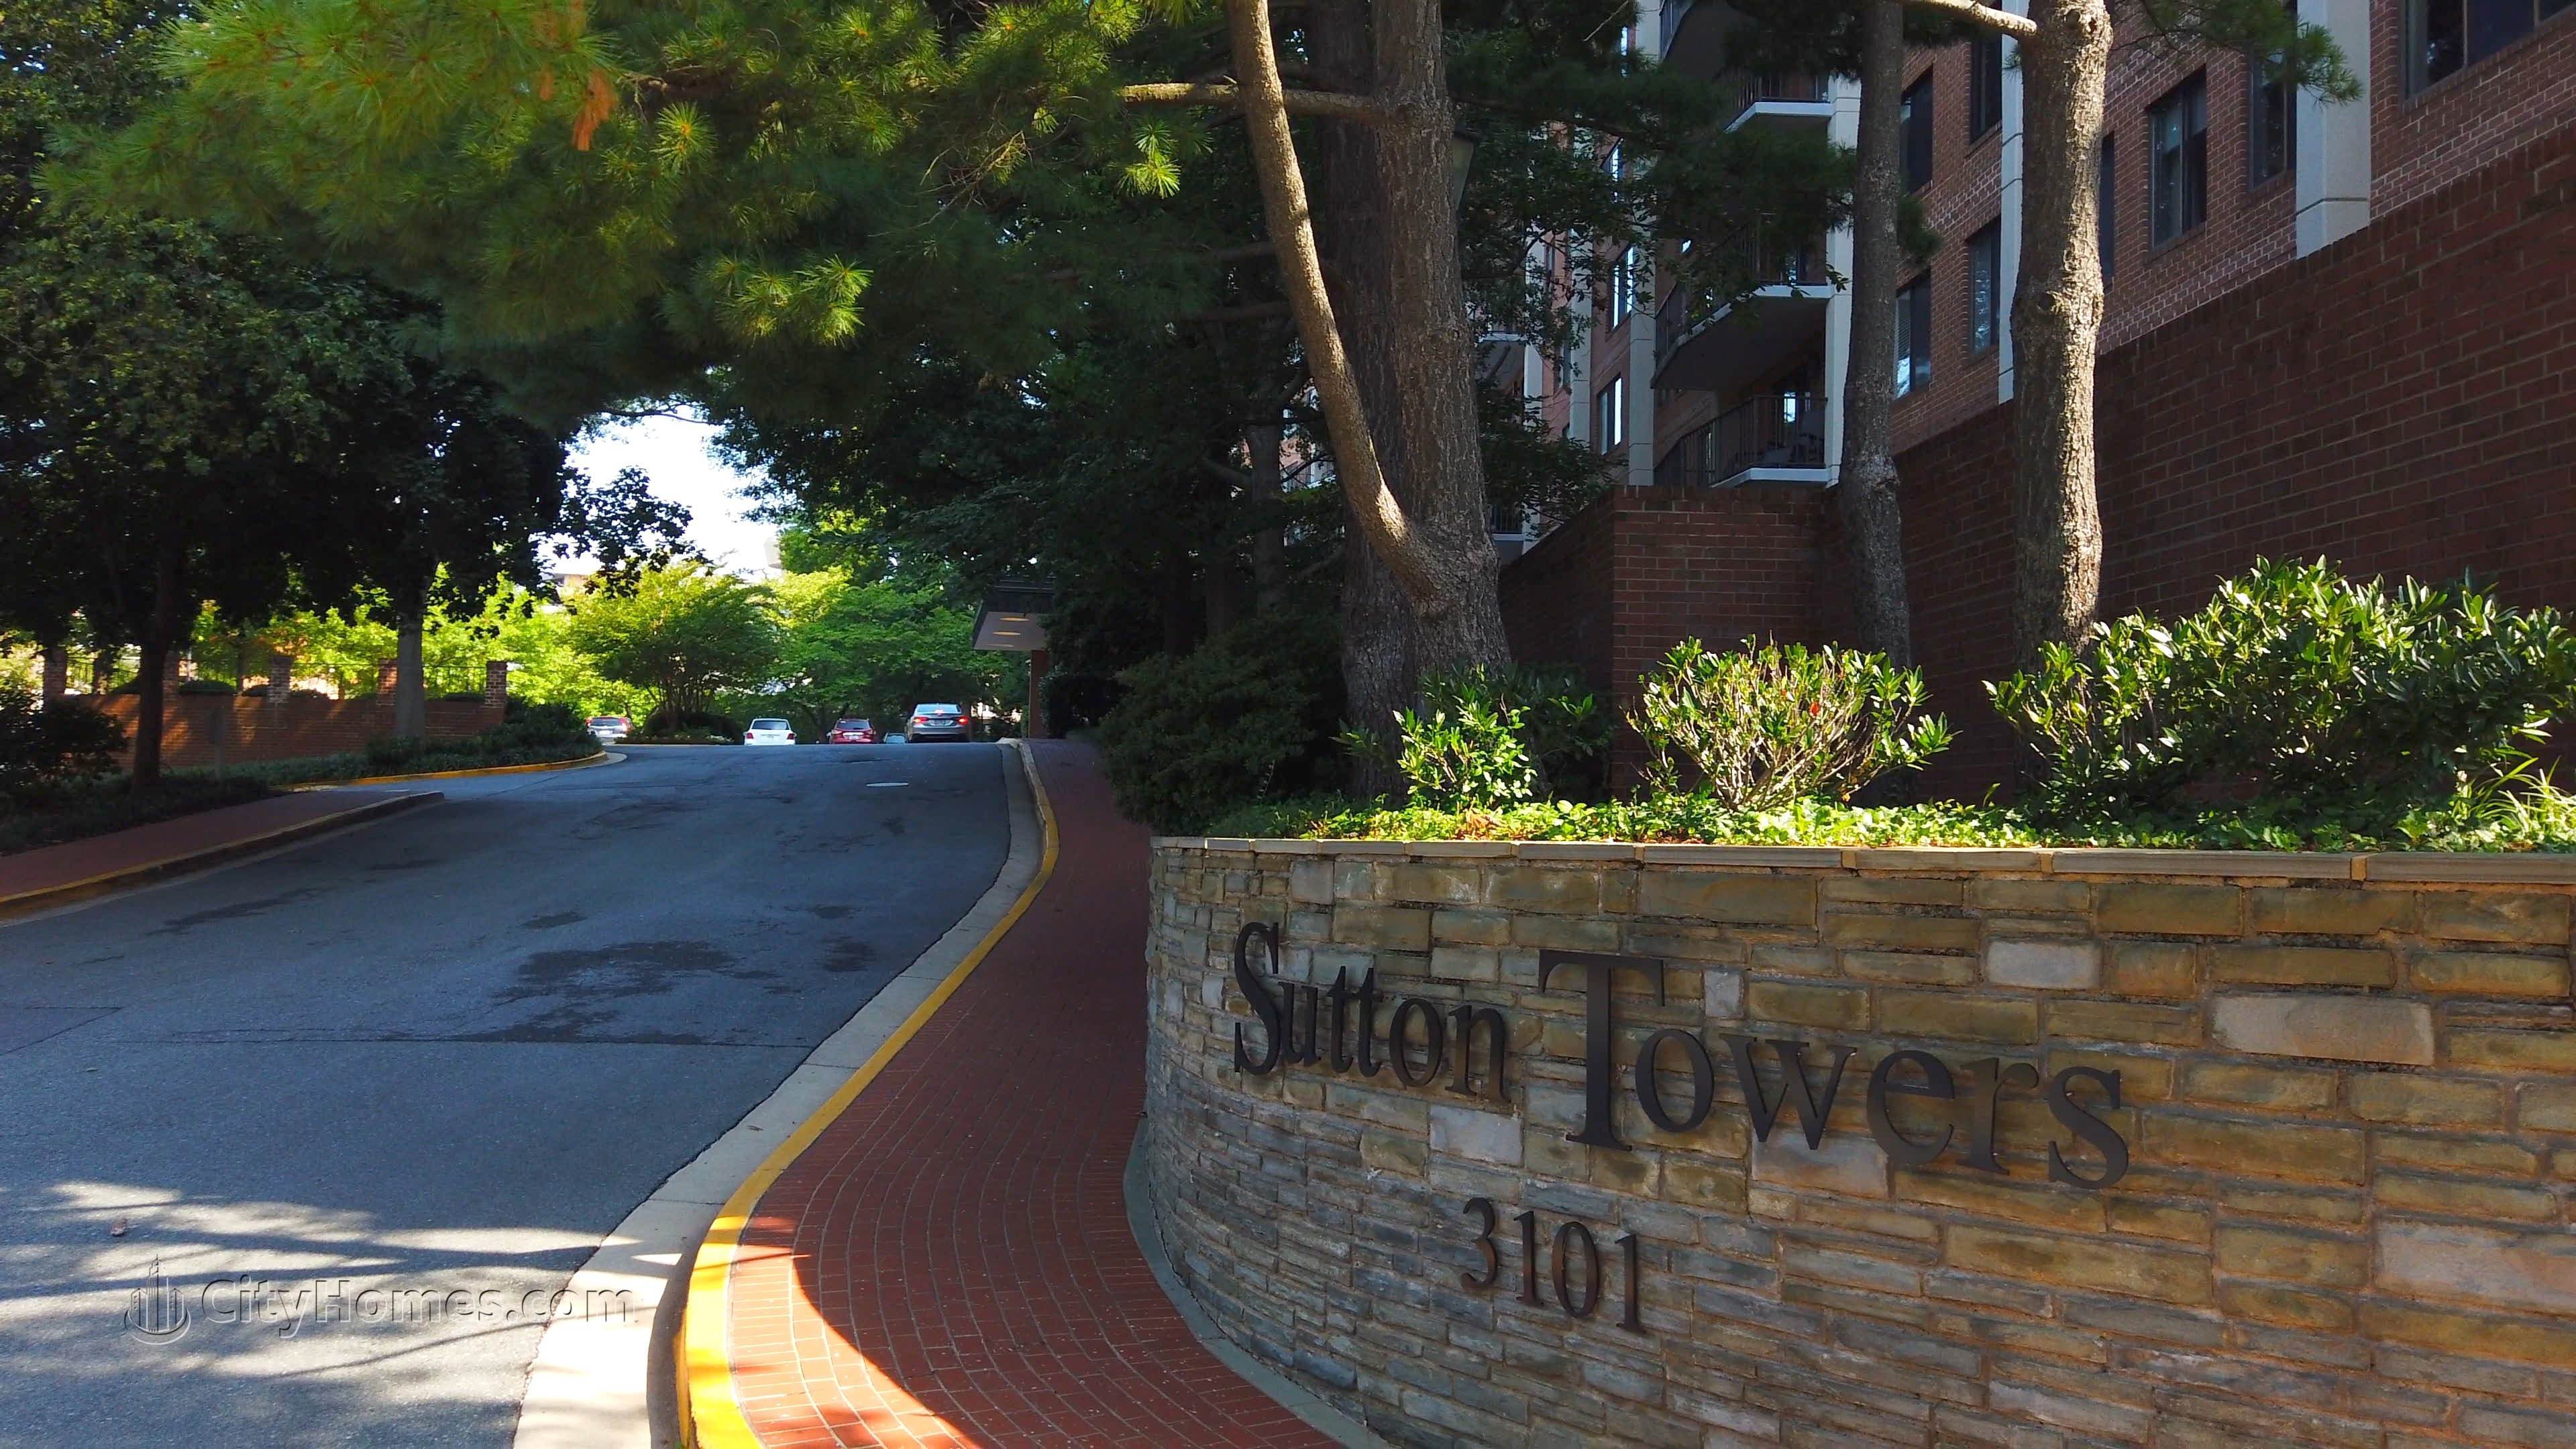 Sutton Towers κτίριο σε 3101 New Mexico Ave NW, Wesley Heights, Washington, DC 20016